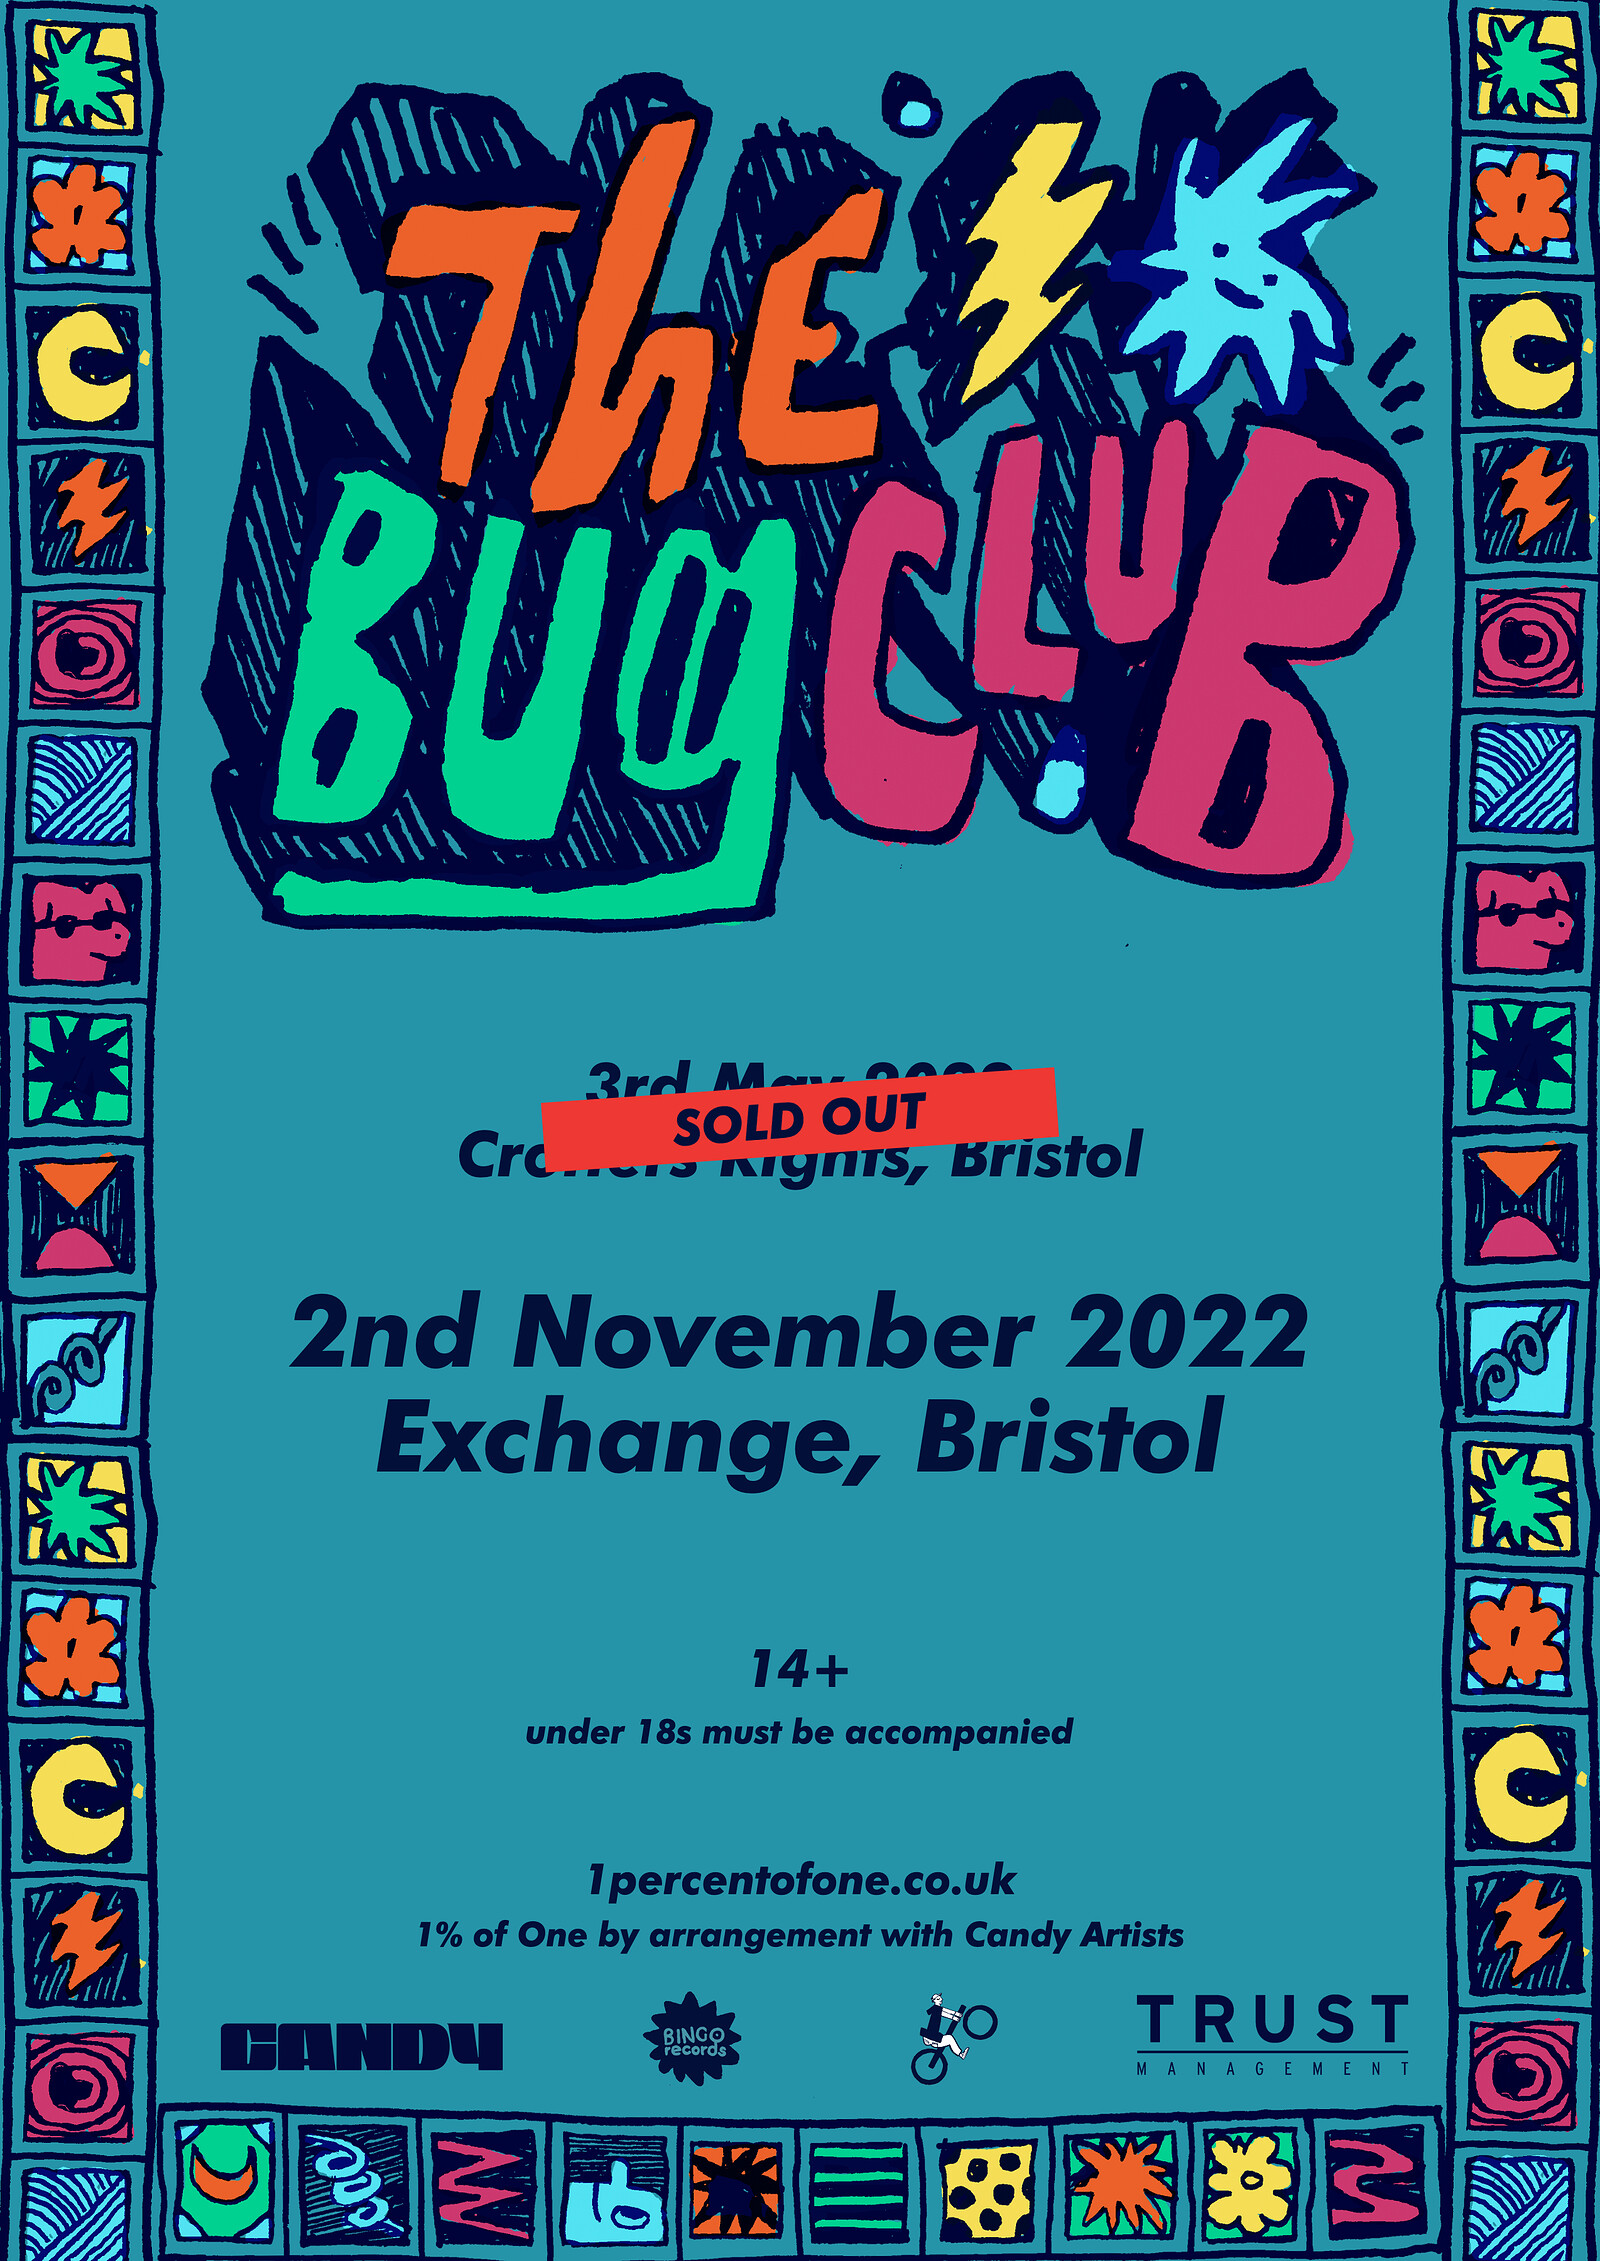 The Bug Club at Exchange